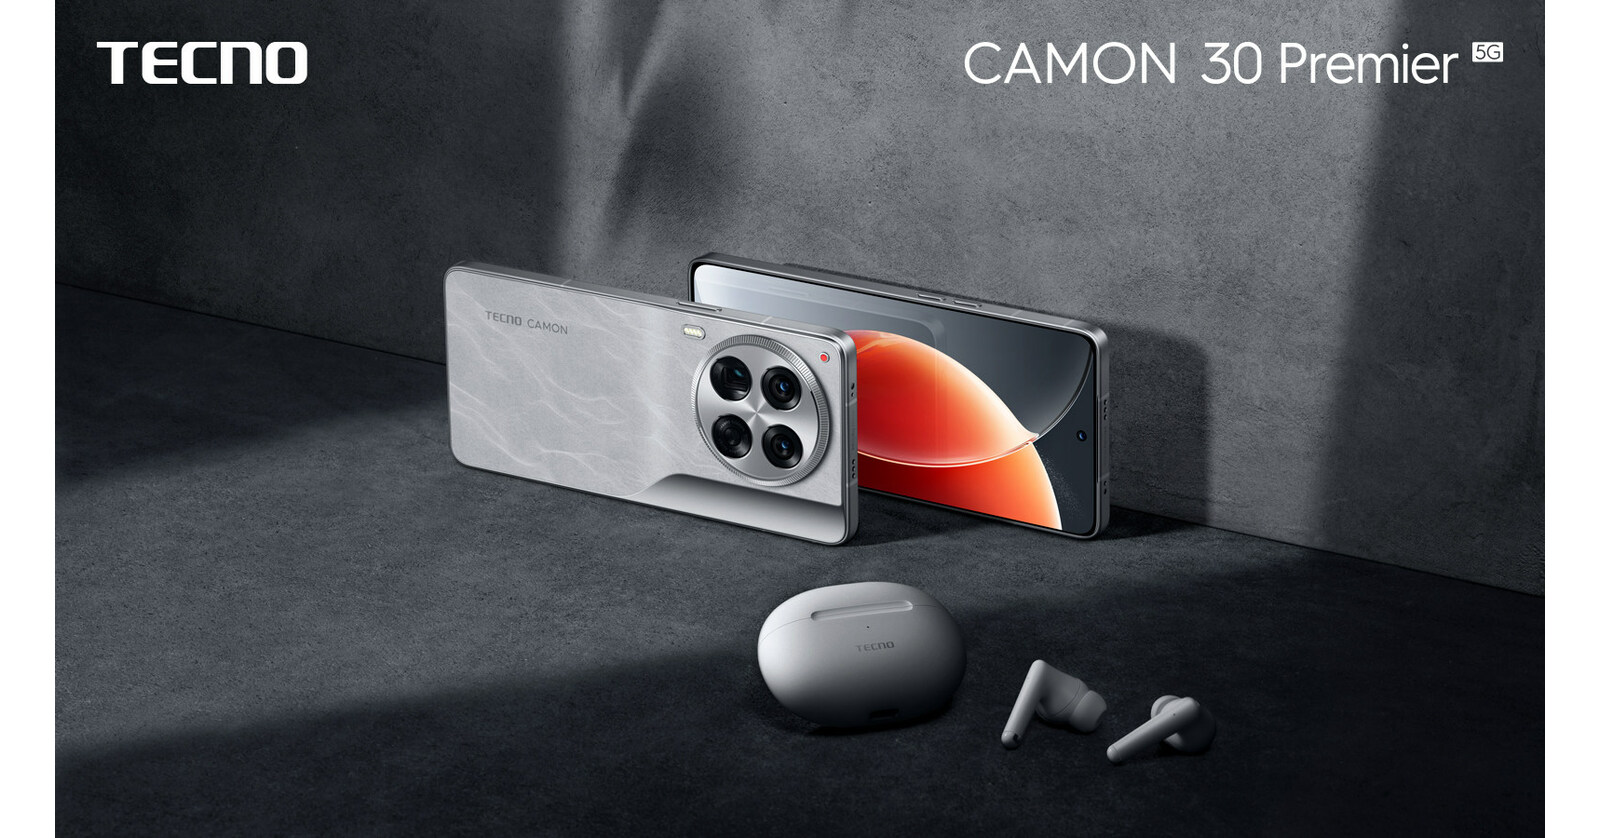 TECNO Launches CAMON 30 Premier 5G - A Video Master with Flagship Dual-Chip Imaging